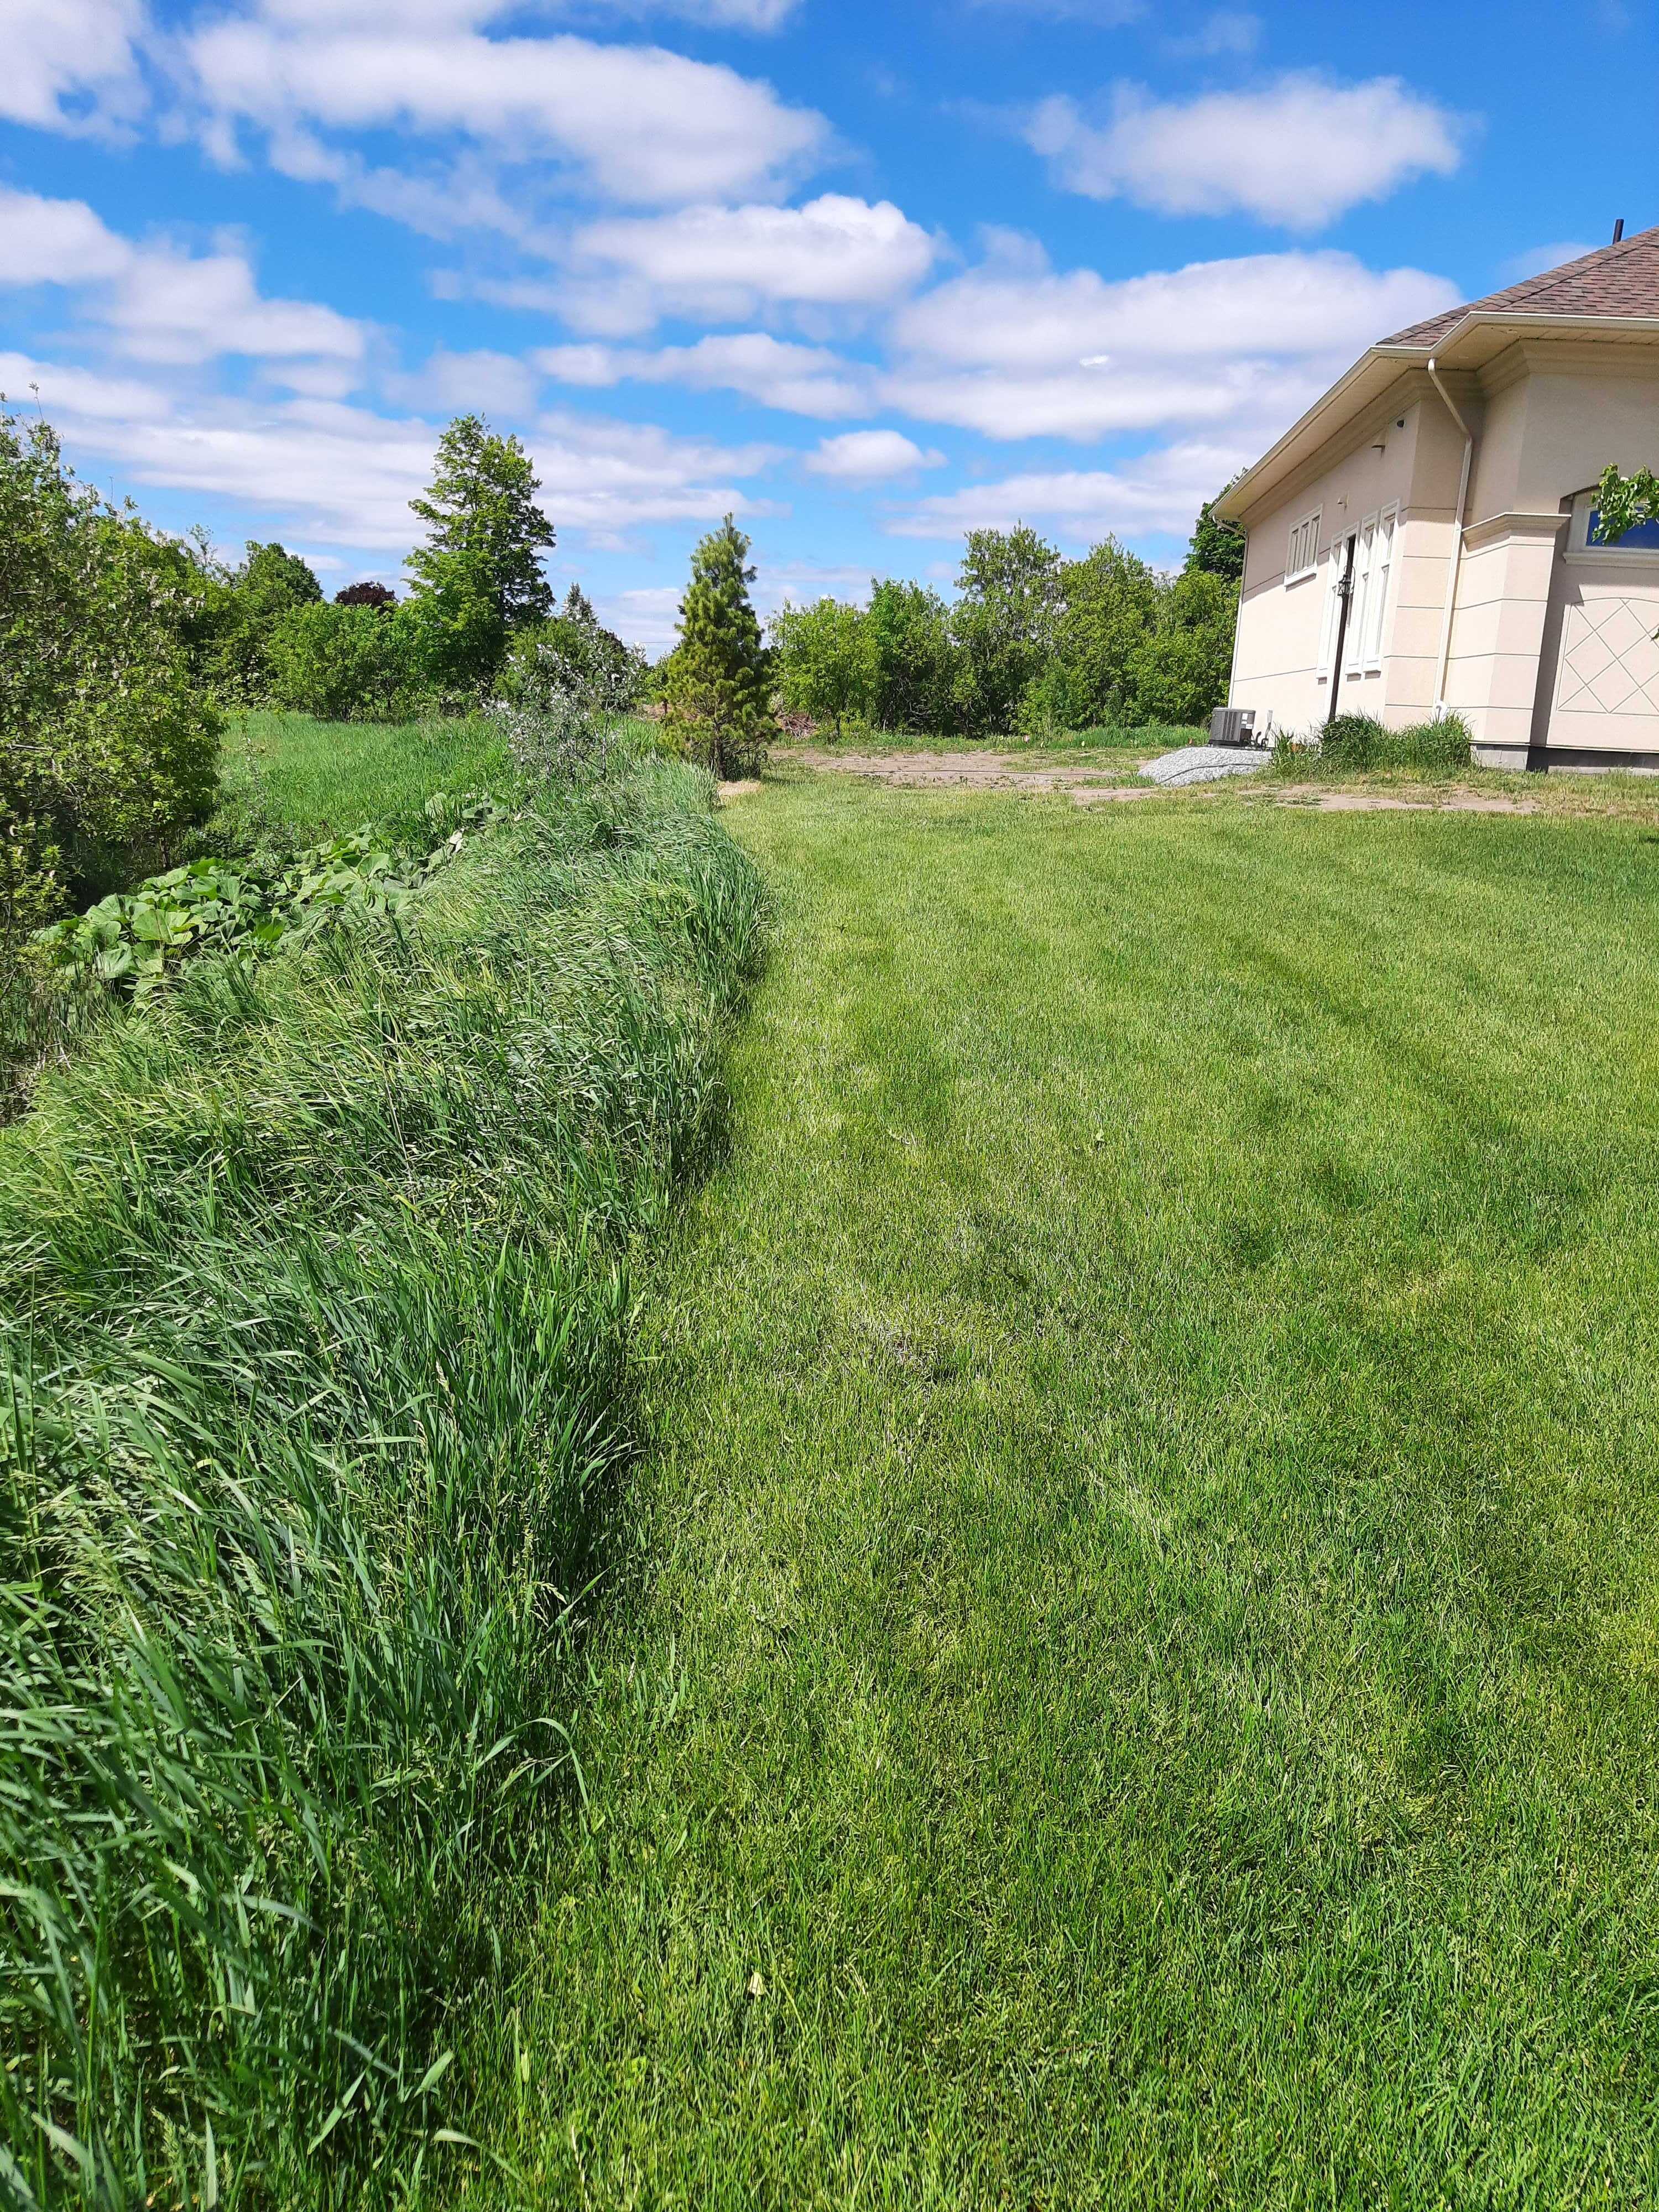 we do not spray manicired lawn but we ABSOLUTELY DO spray tall grass like in the picture. Mosquitos love tall grass like this and it is a very importantvaluable control surface